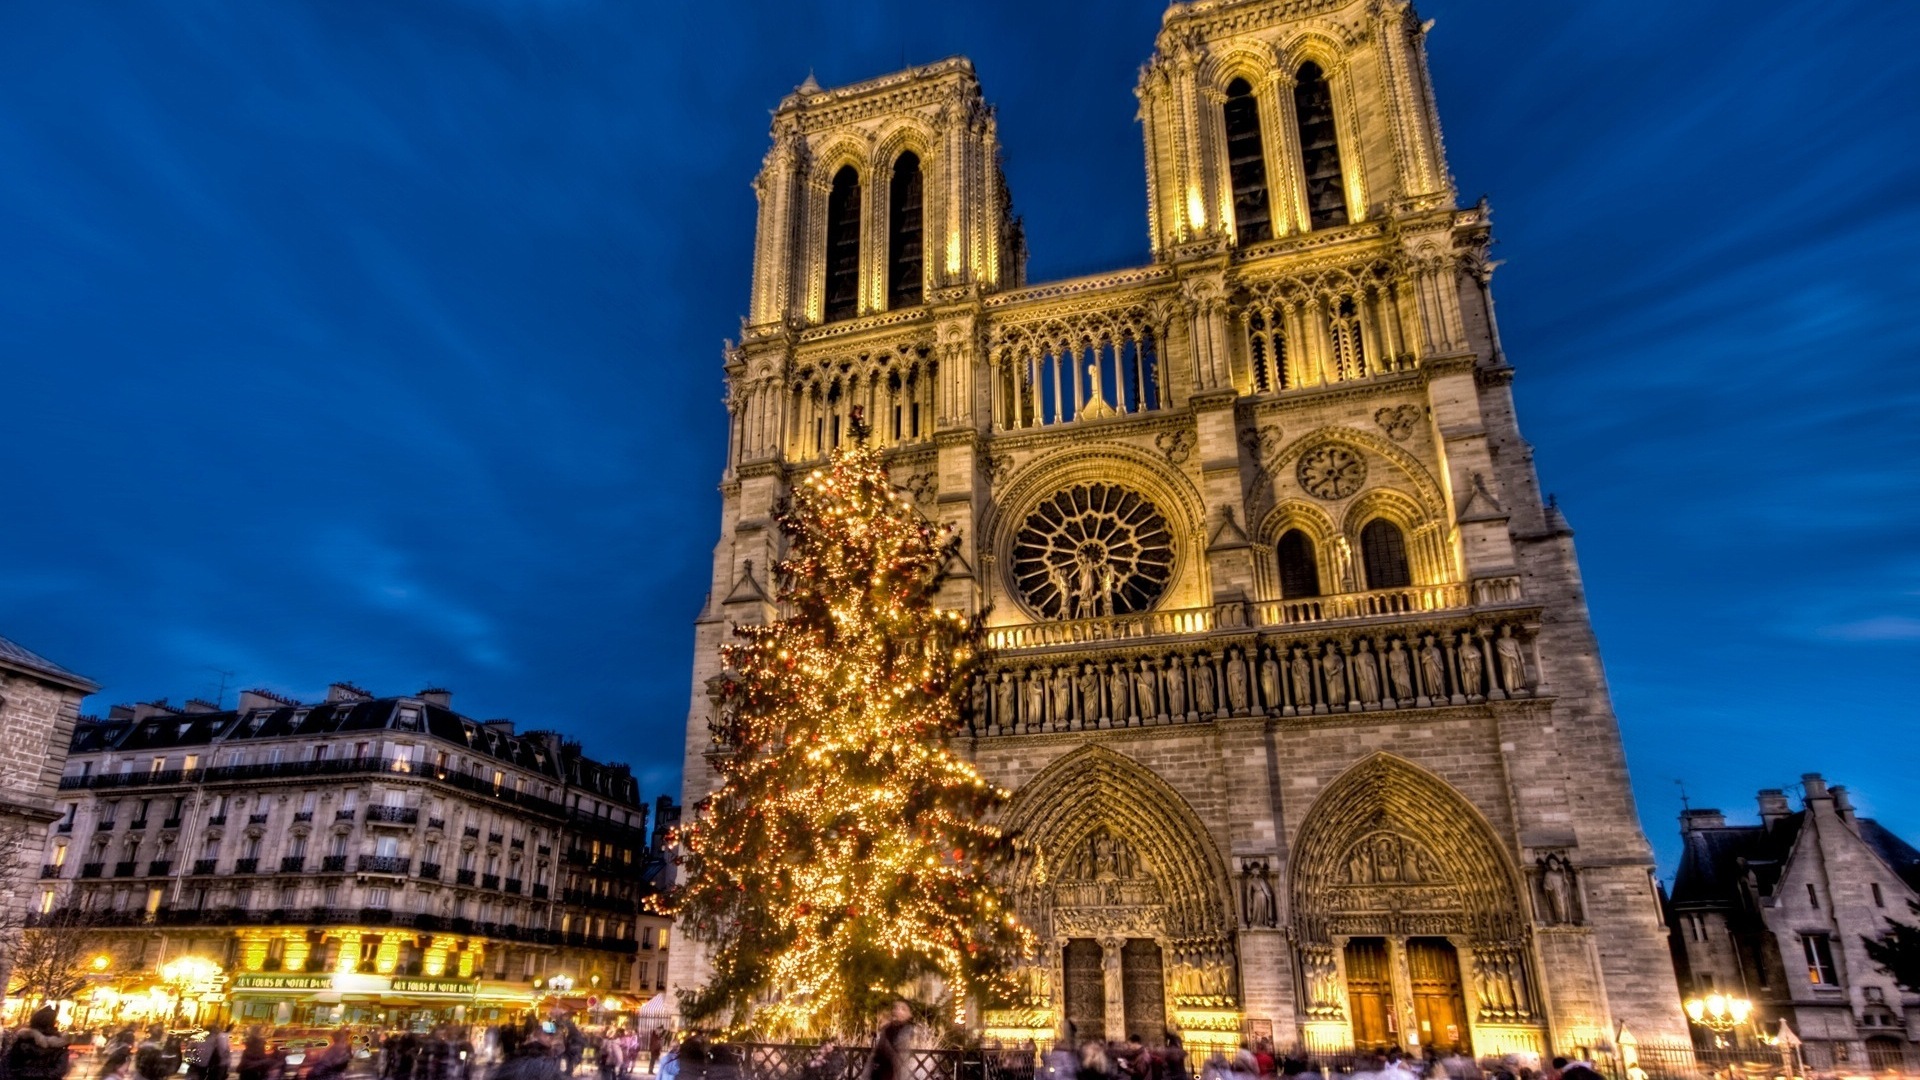 Notre Dame HD Wallpapers #7 - 1920x1080